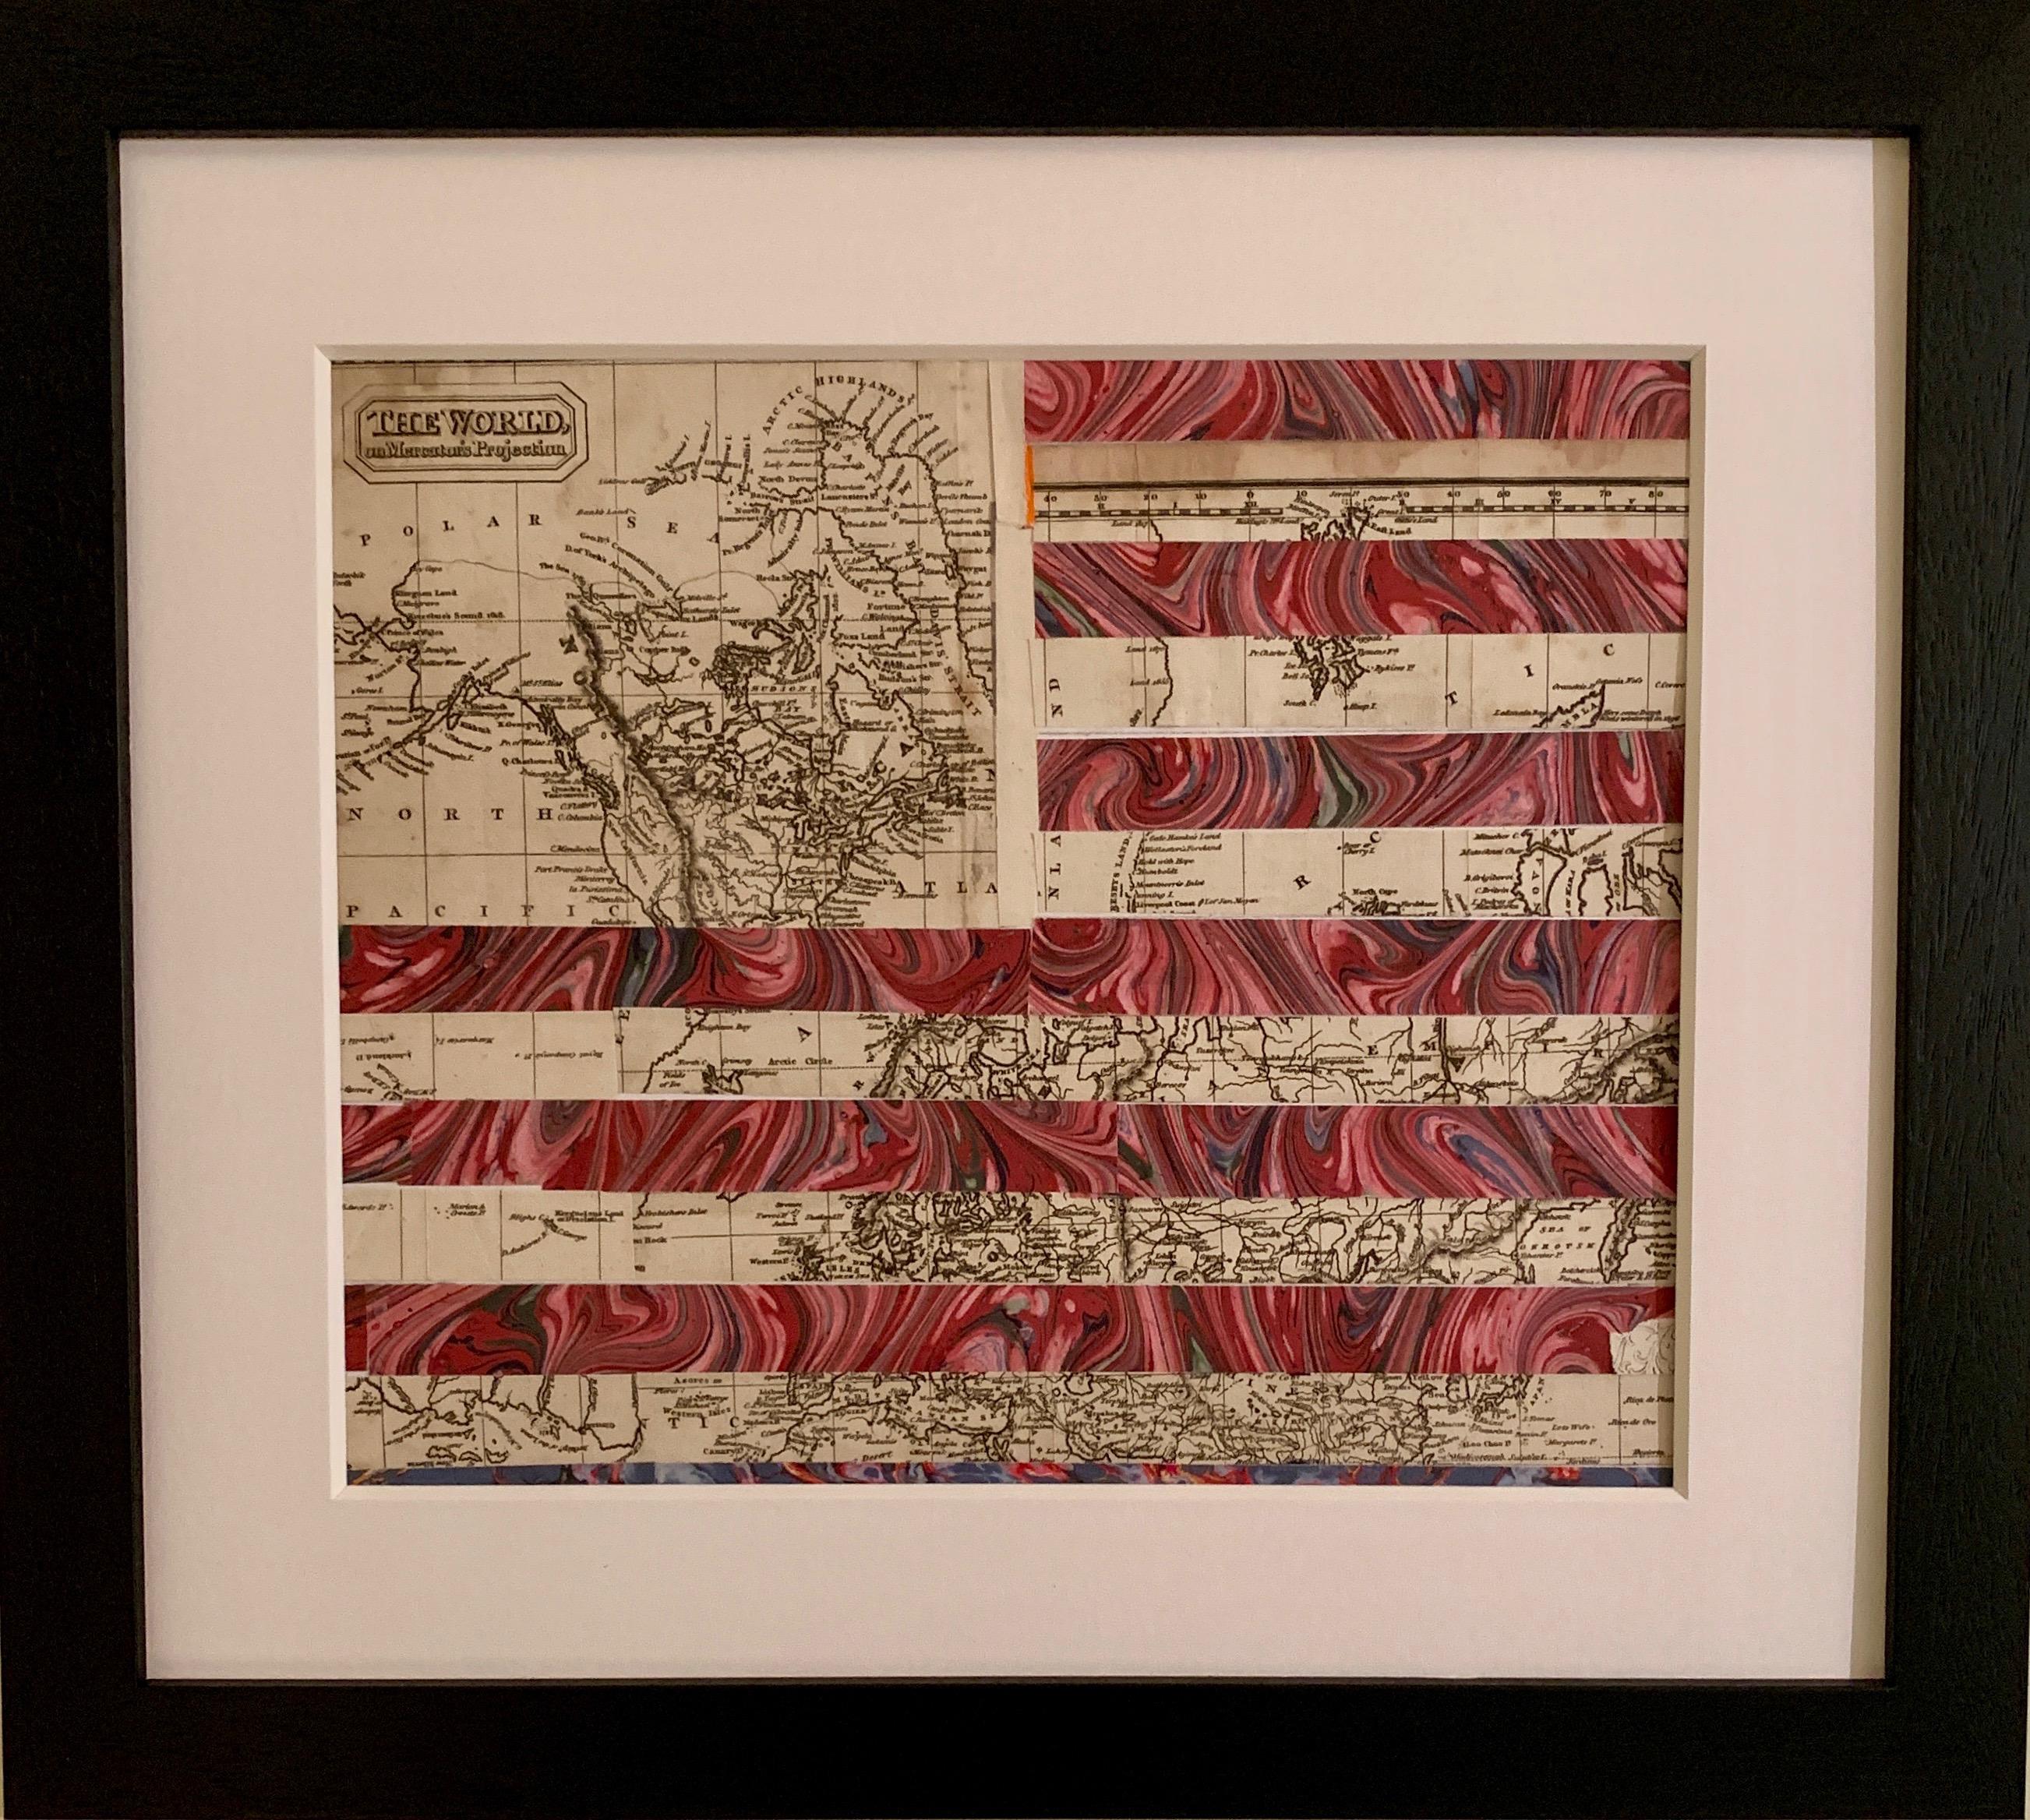 American flag collage with 19th century engraving of California as an Island - Mixed Media Art by Claude Howard Stuart